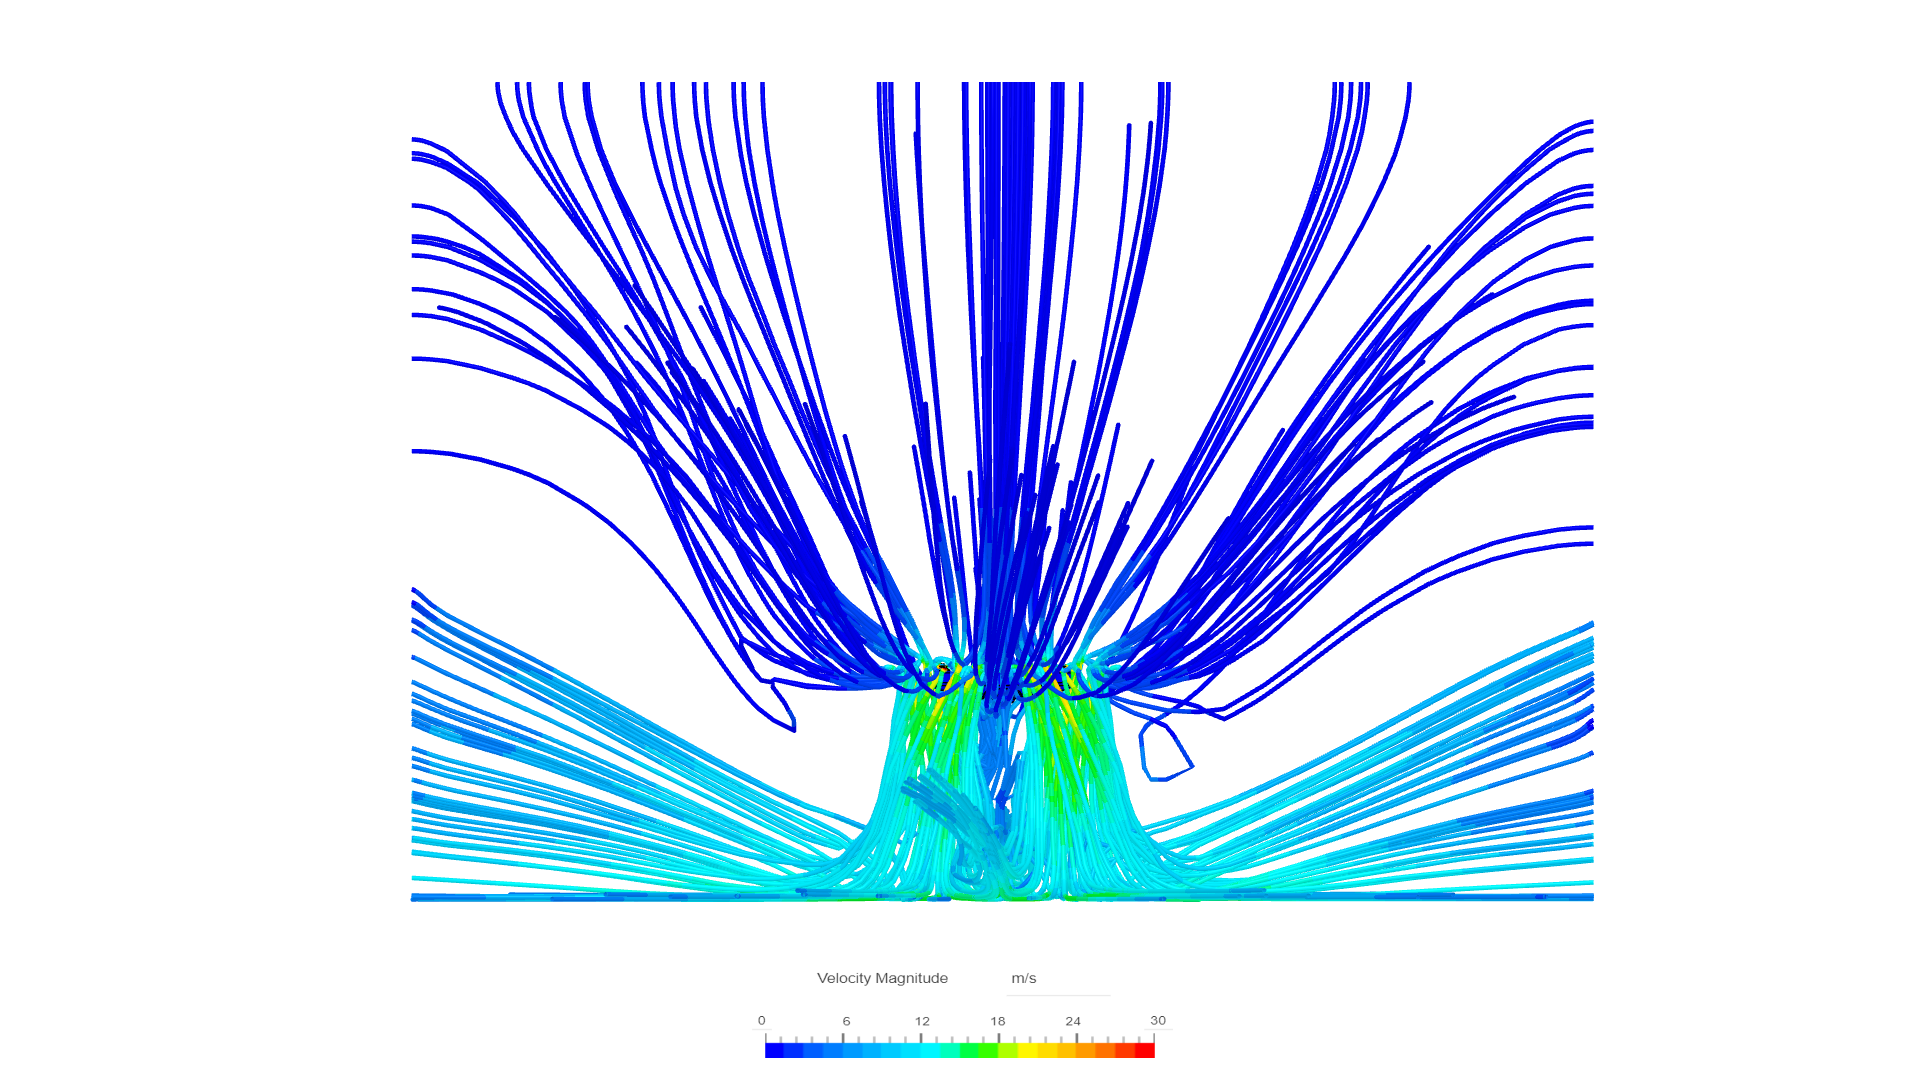 Subsonic test of large propeller image